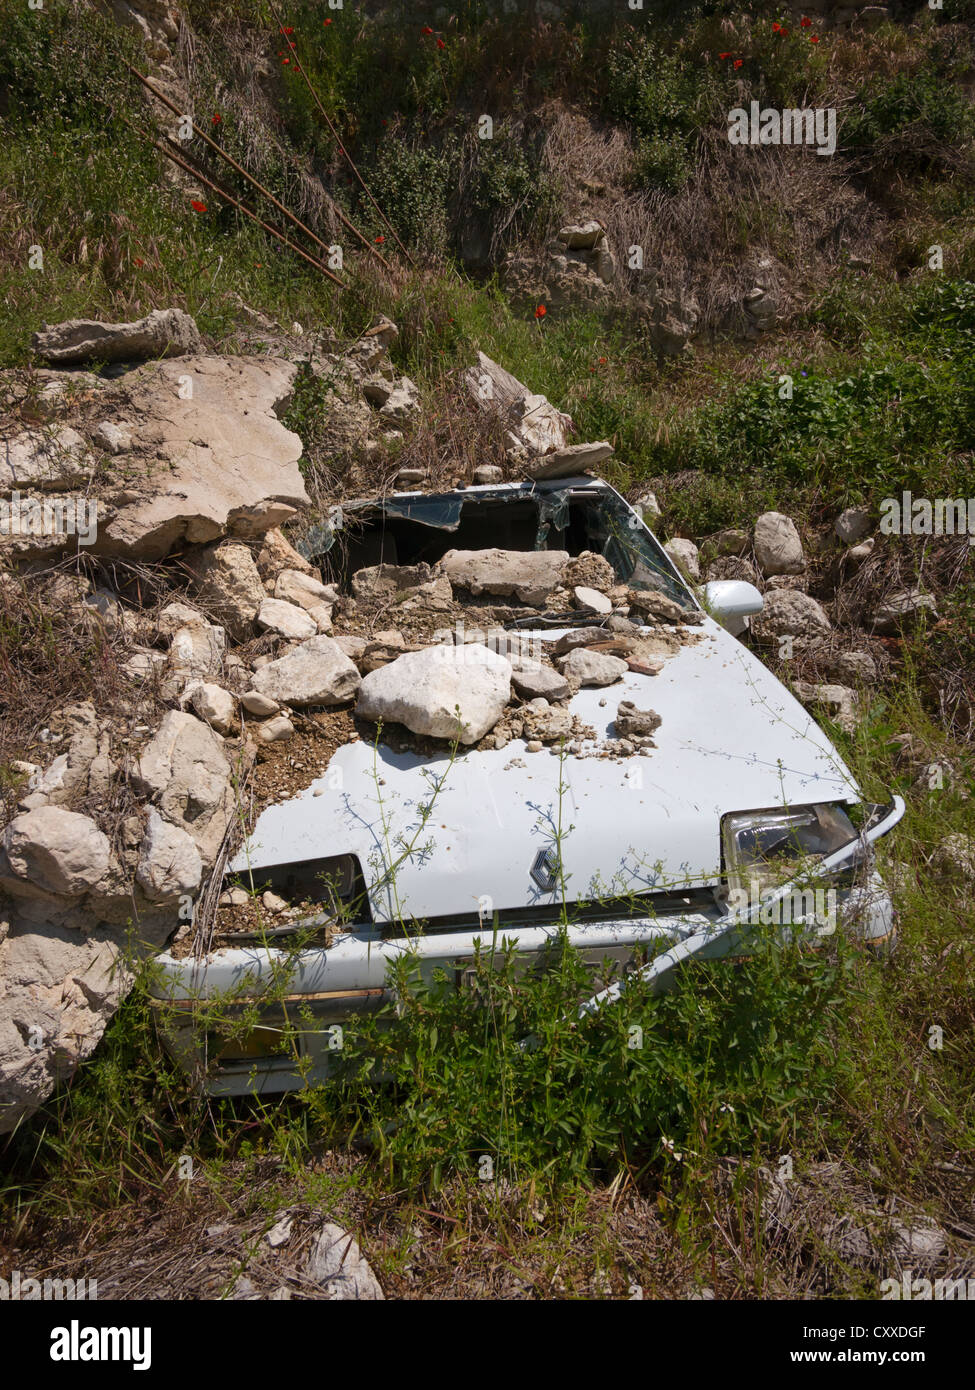 Smashed car, destroyed by the earthquake on 6th April 2009 in Castelnuovo near L'Aquila, Abruzzo region, Italy, Europe Stock Photo